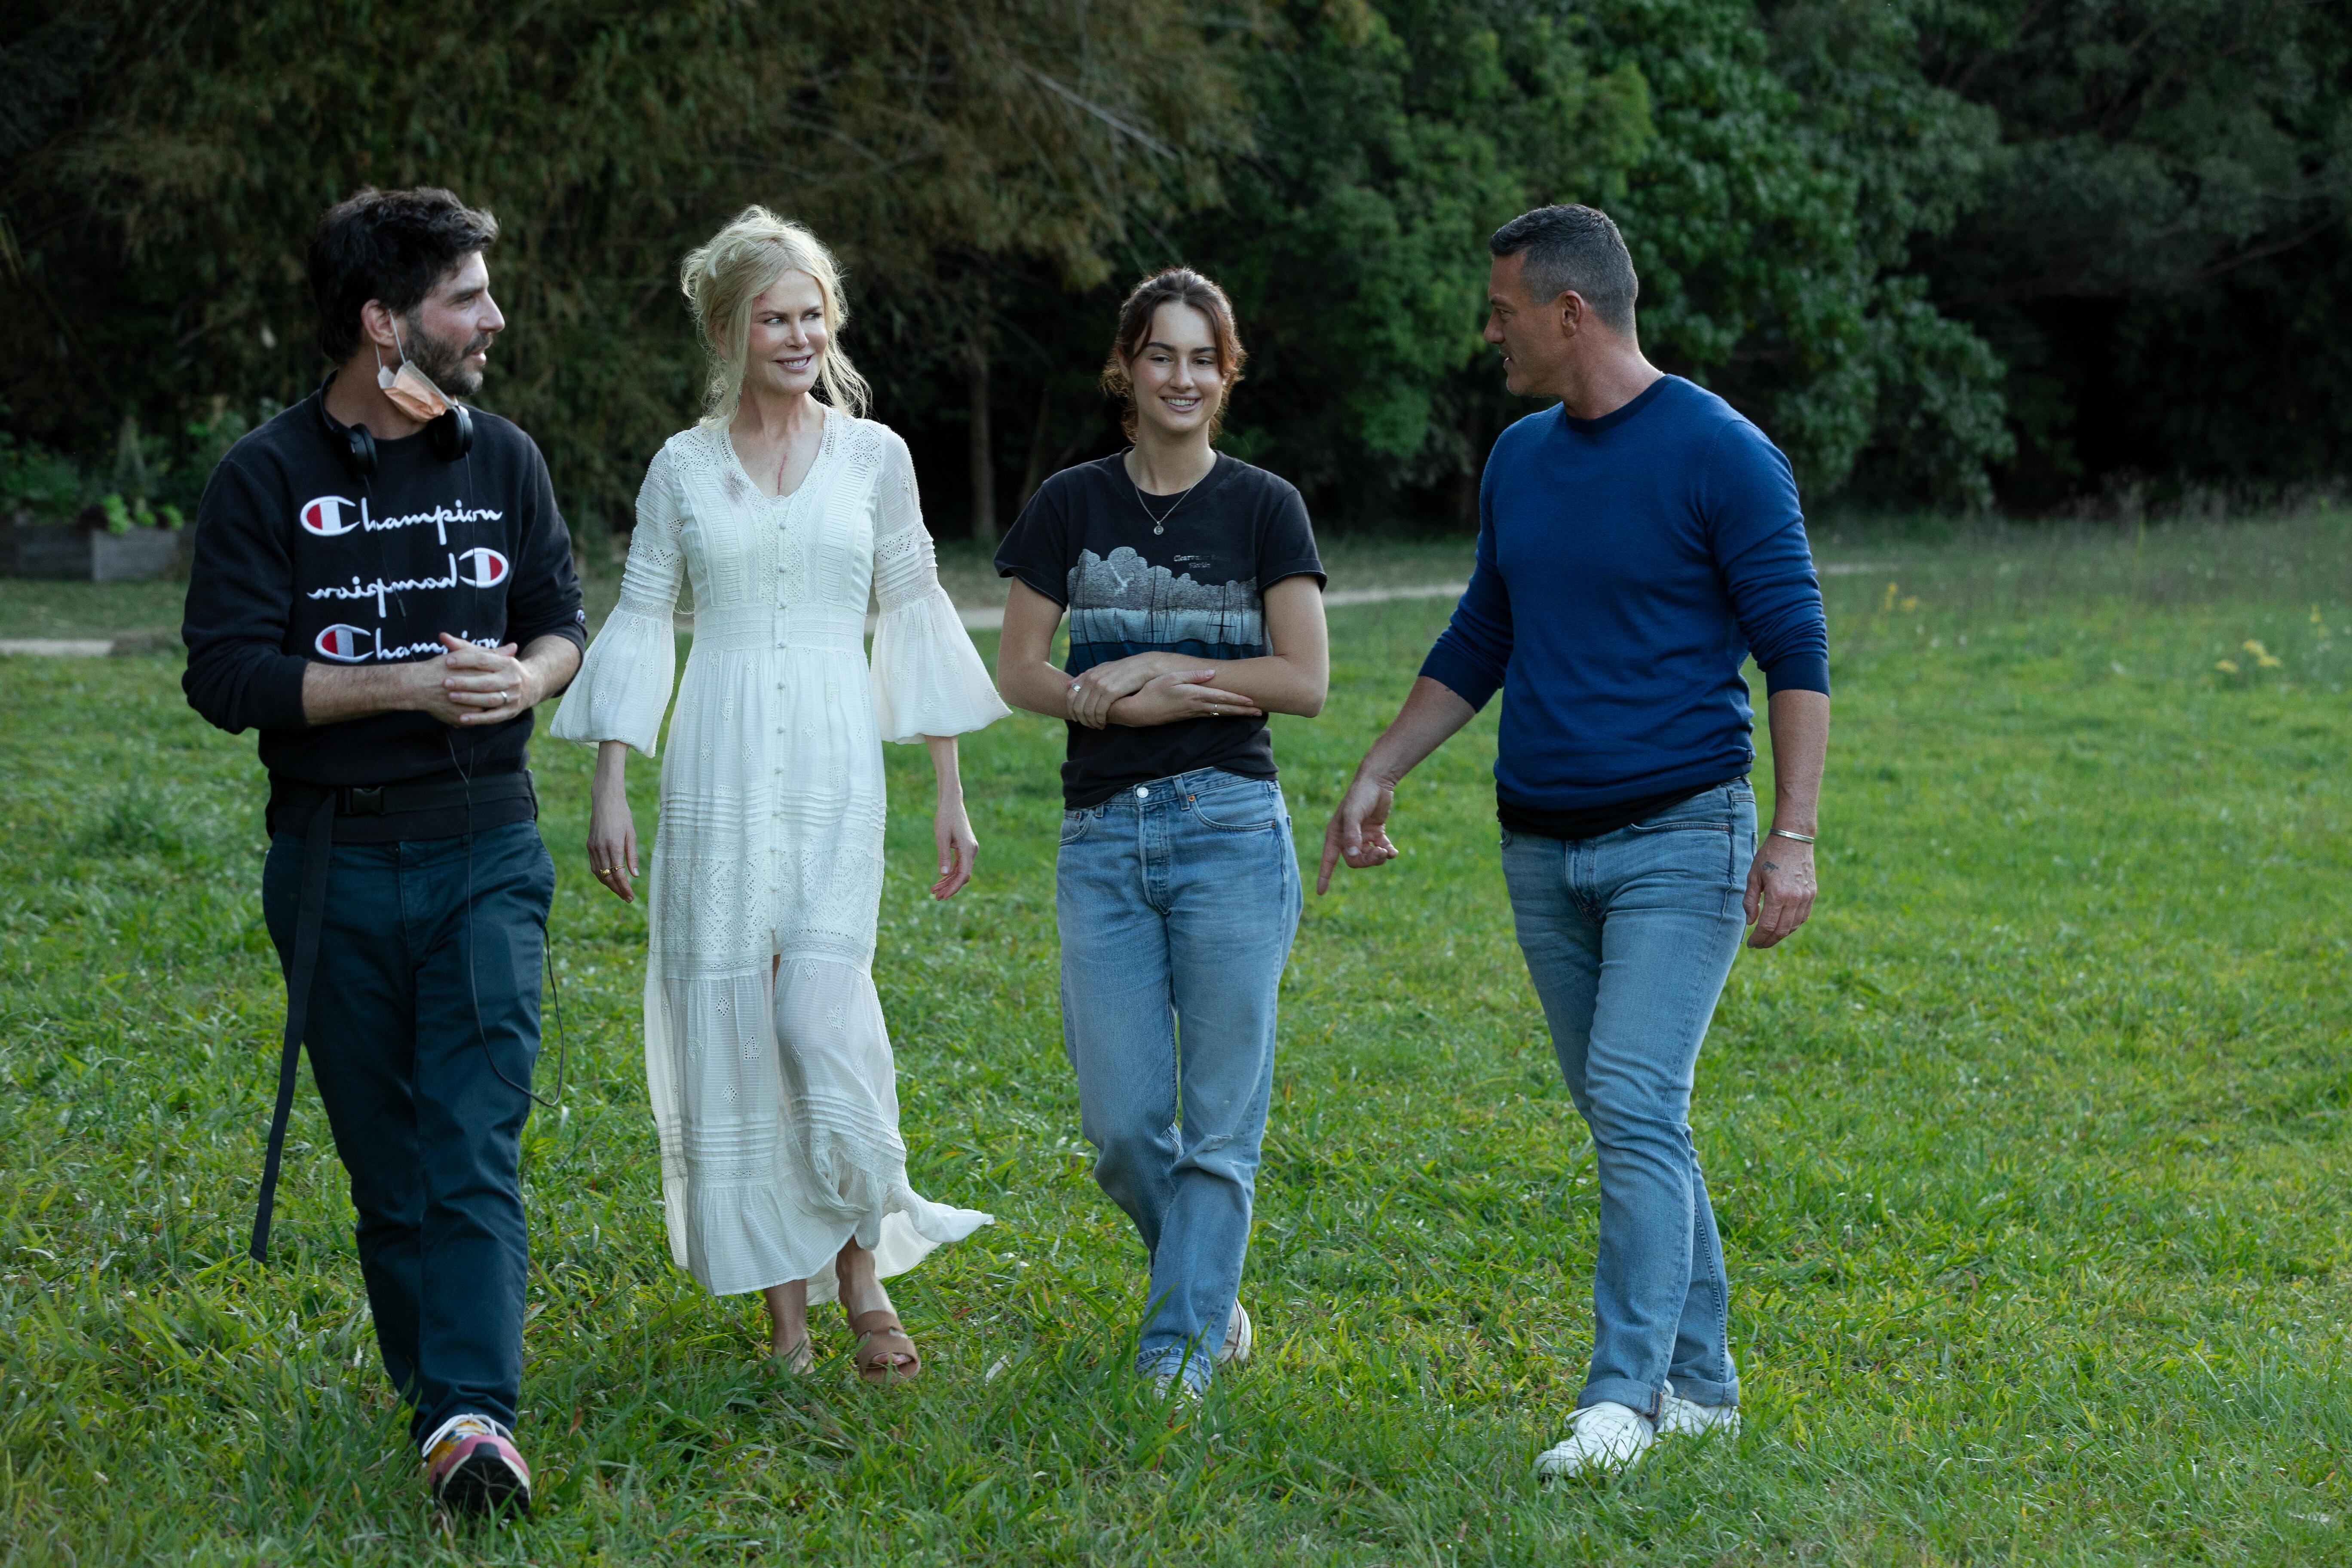 Nine Perfect Strangers director Jonathan Levine walks with Nicole Kidman, Grace Van Patten, and Luke Evans. They are smiling and talking.